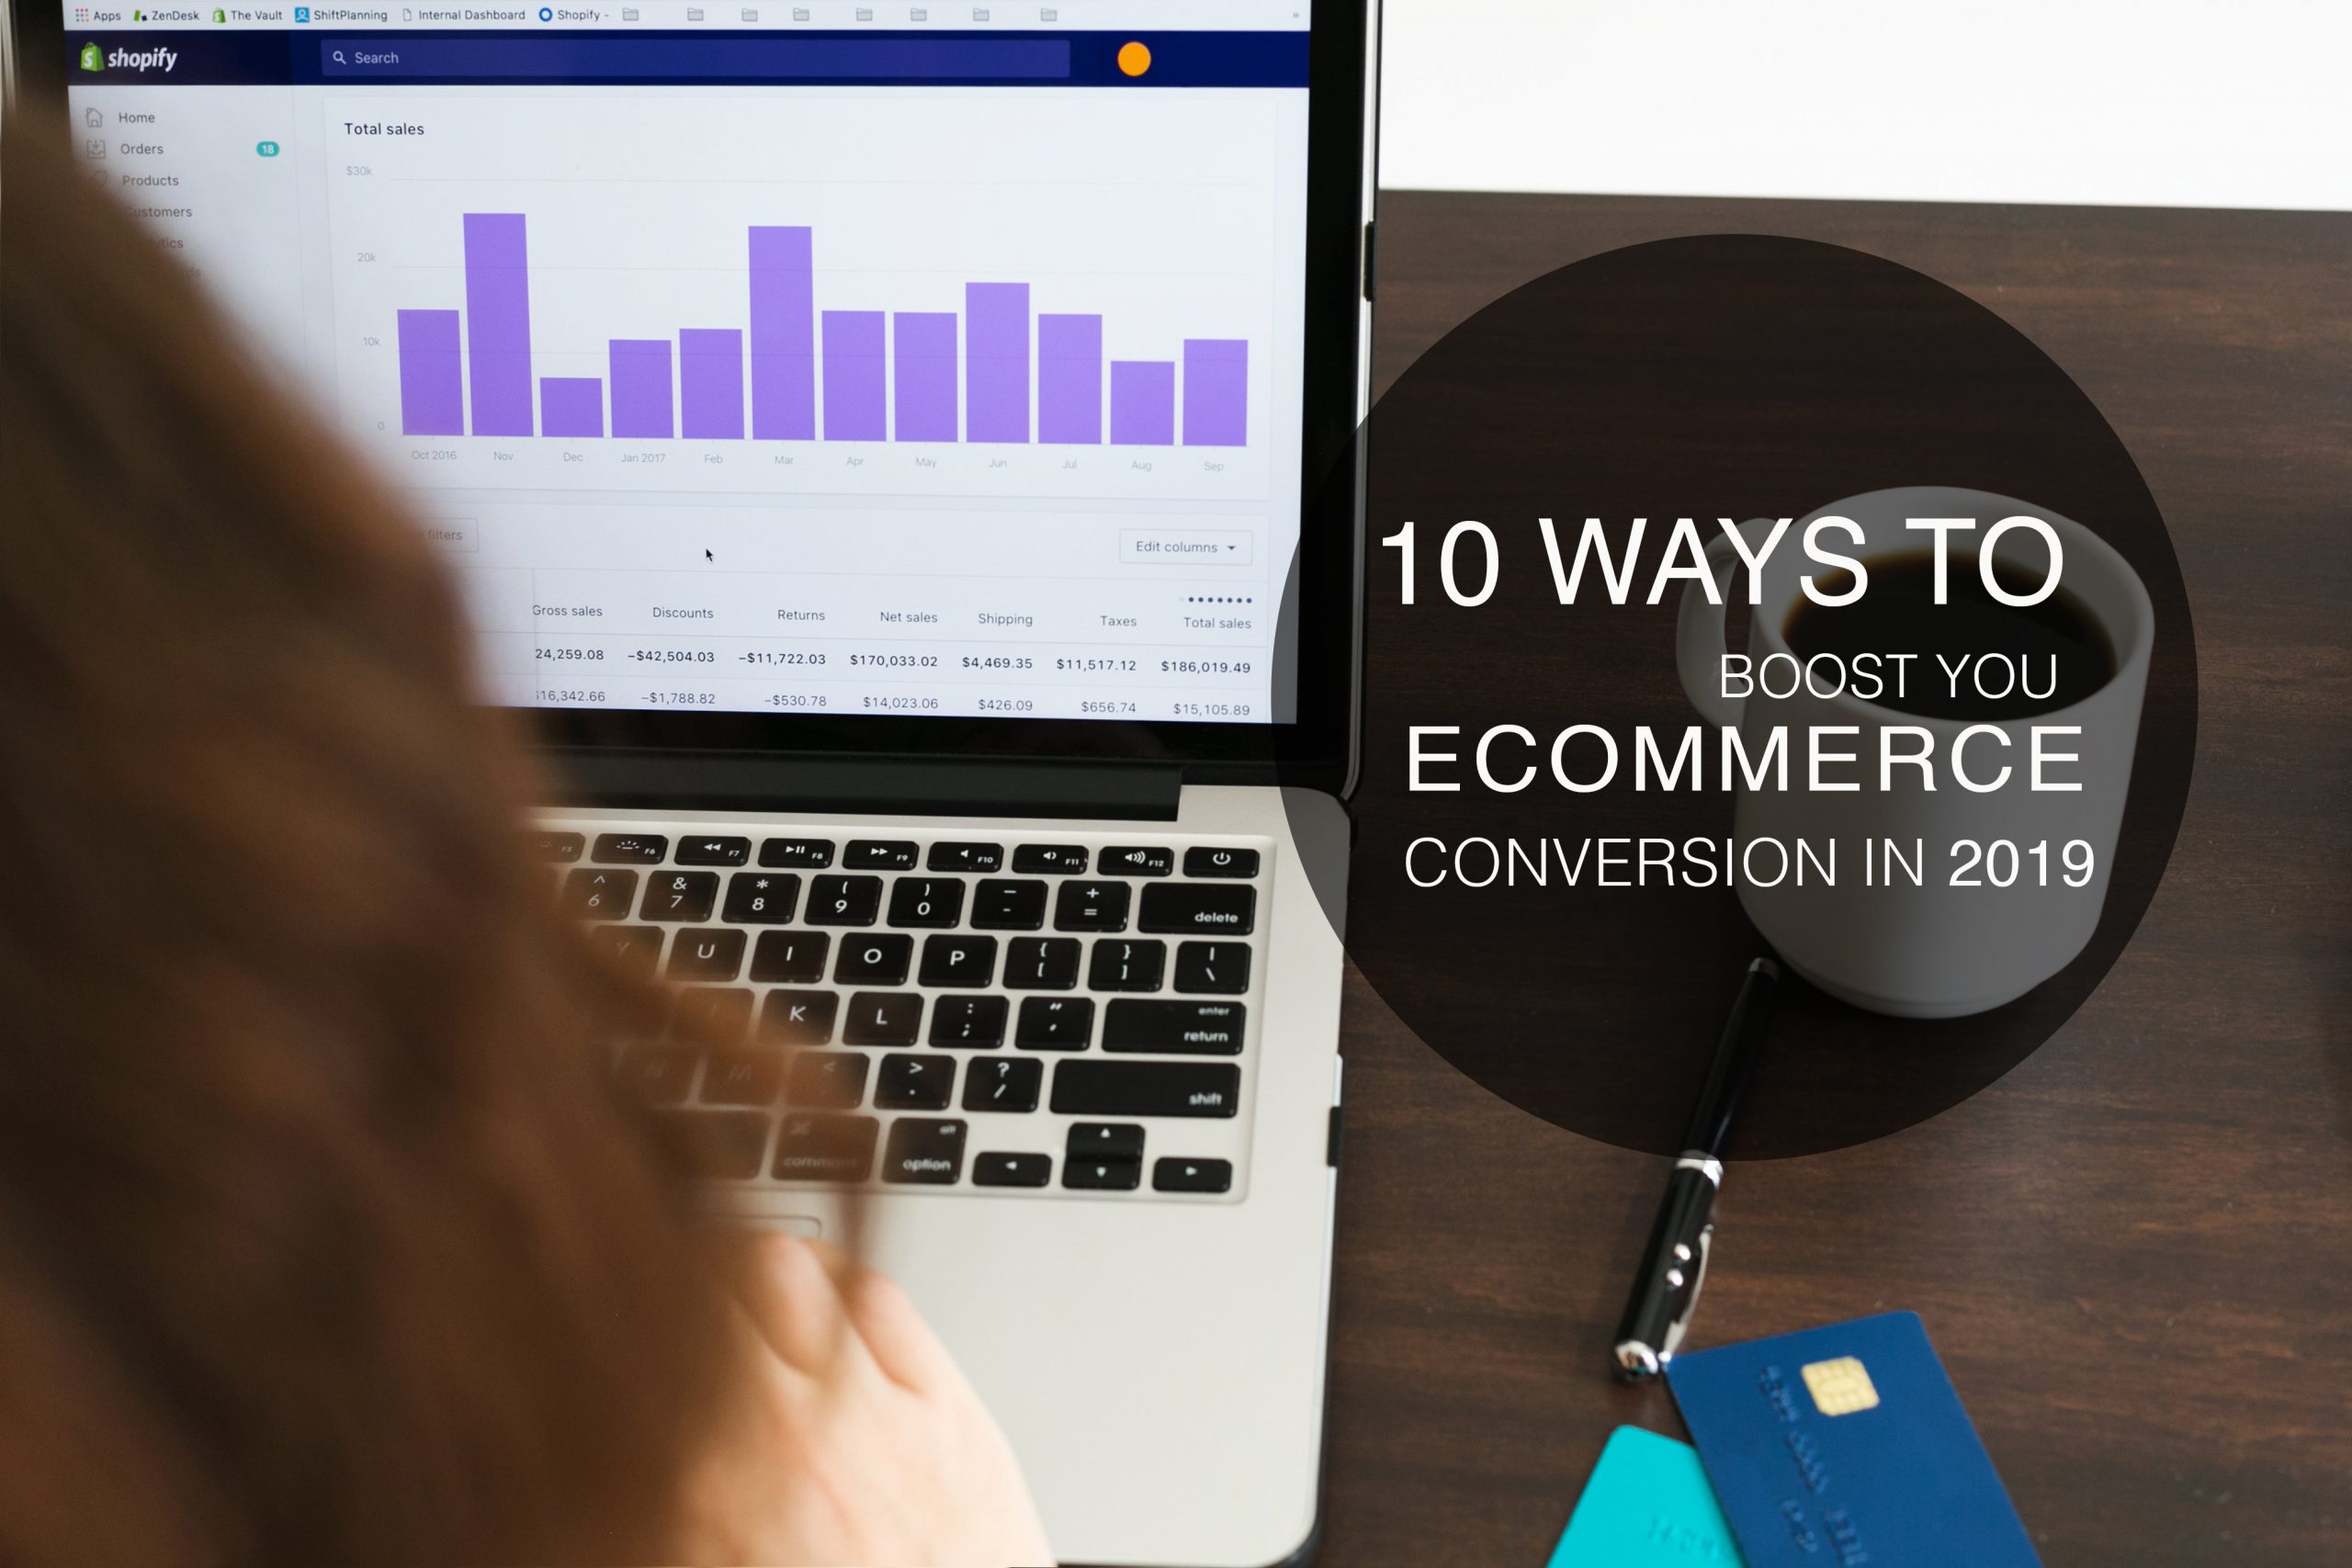 10 Ways to Boost your eCommerce Conversion in 2019